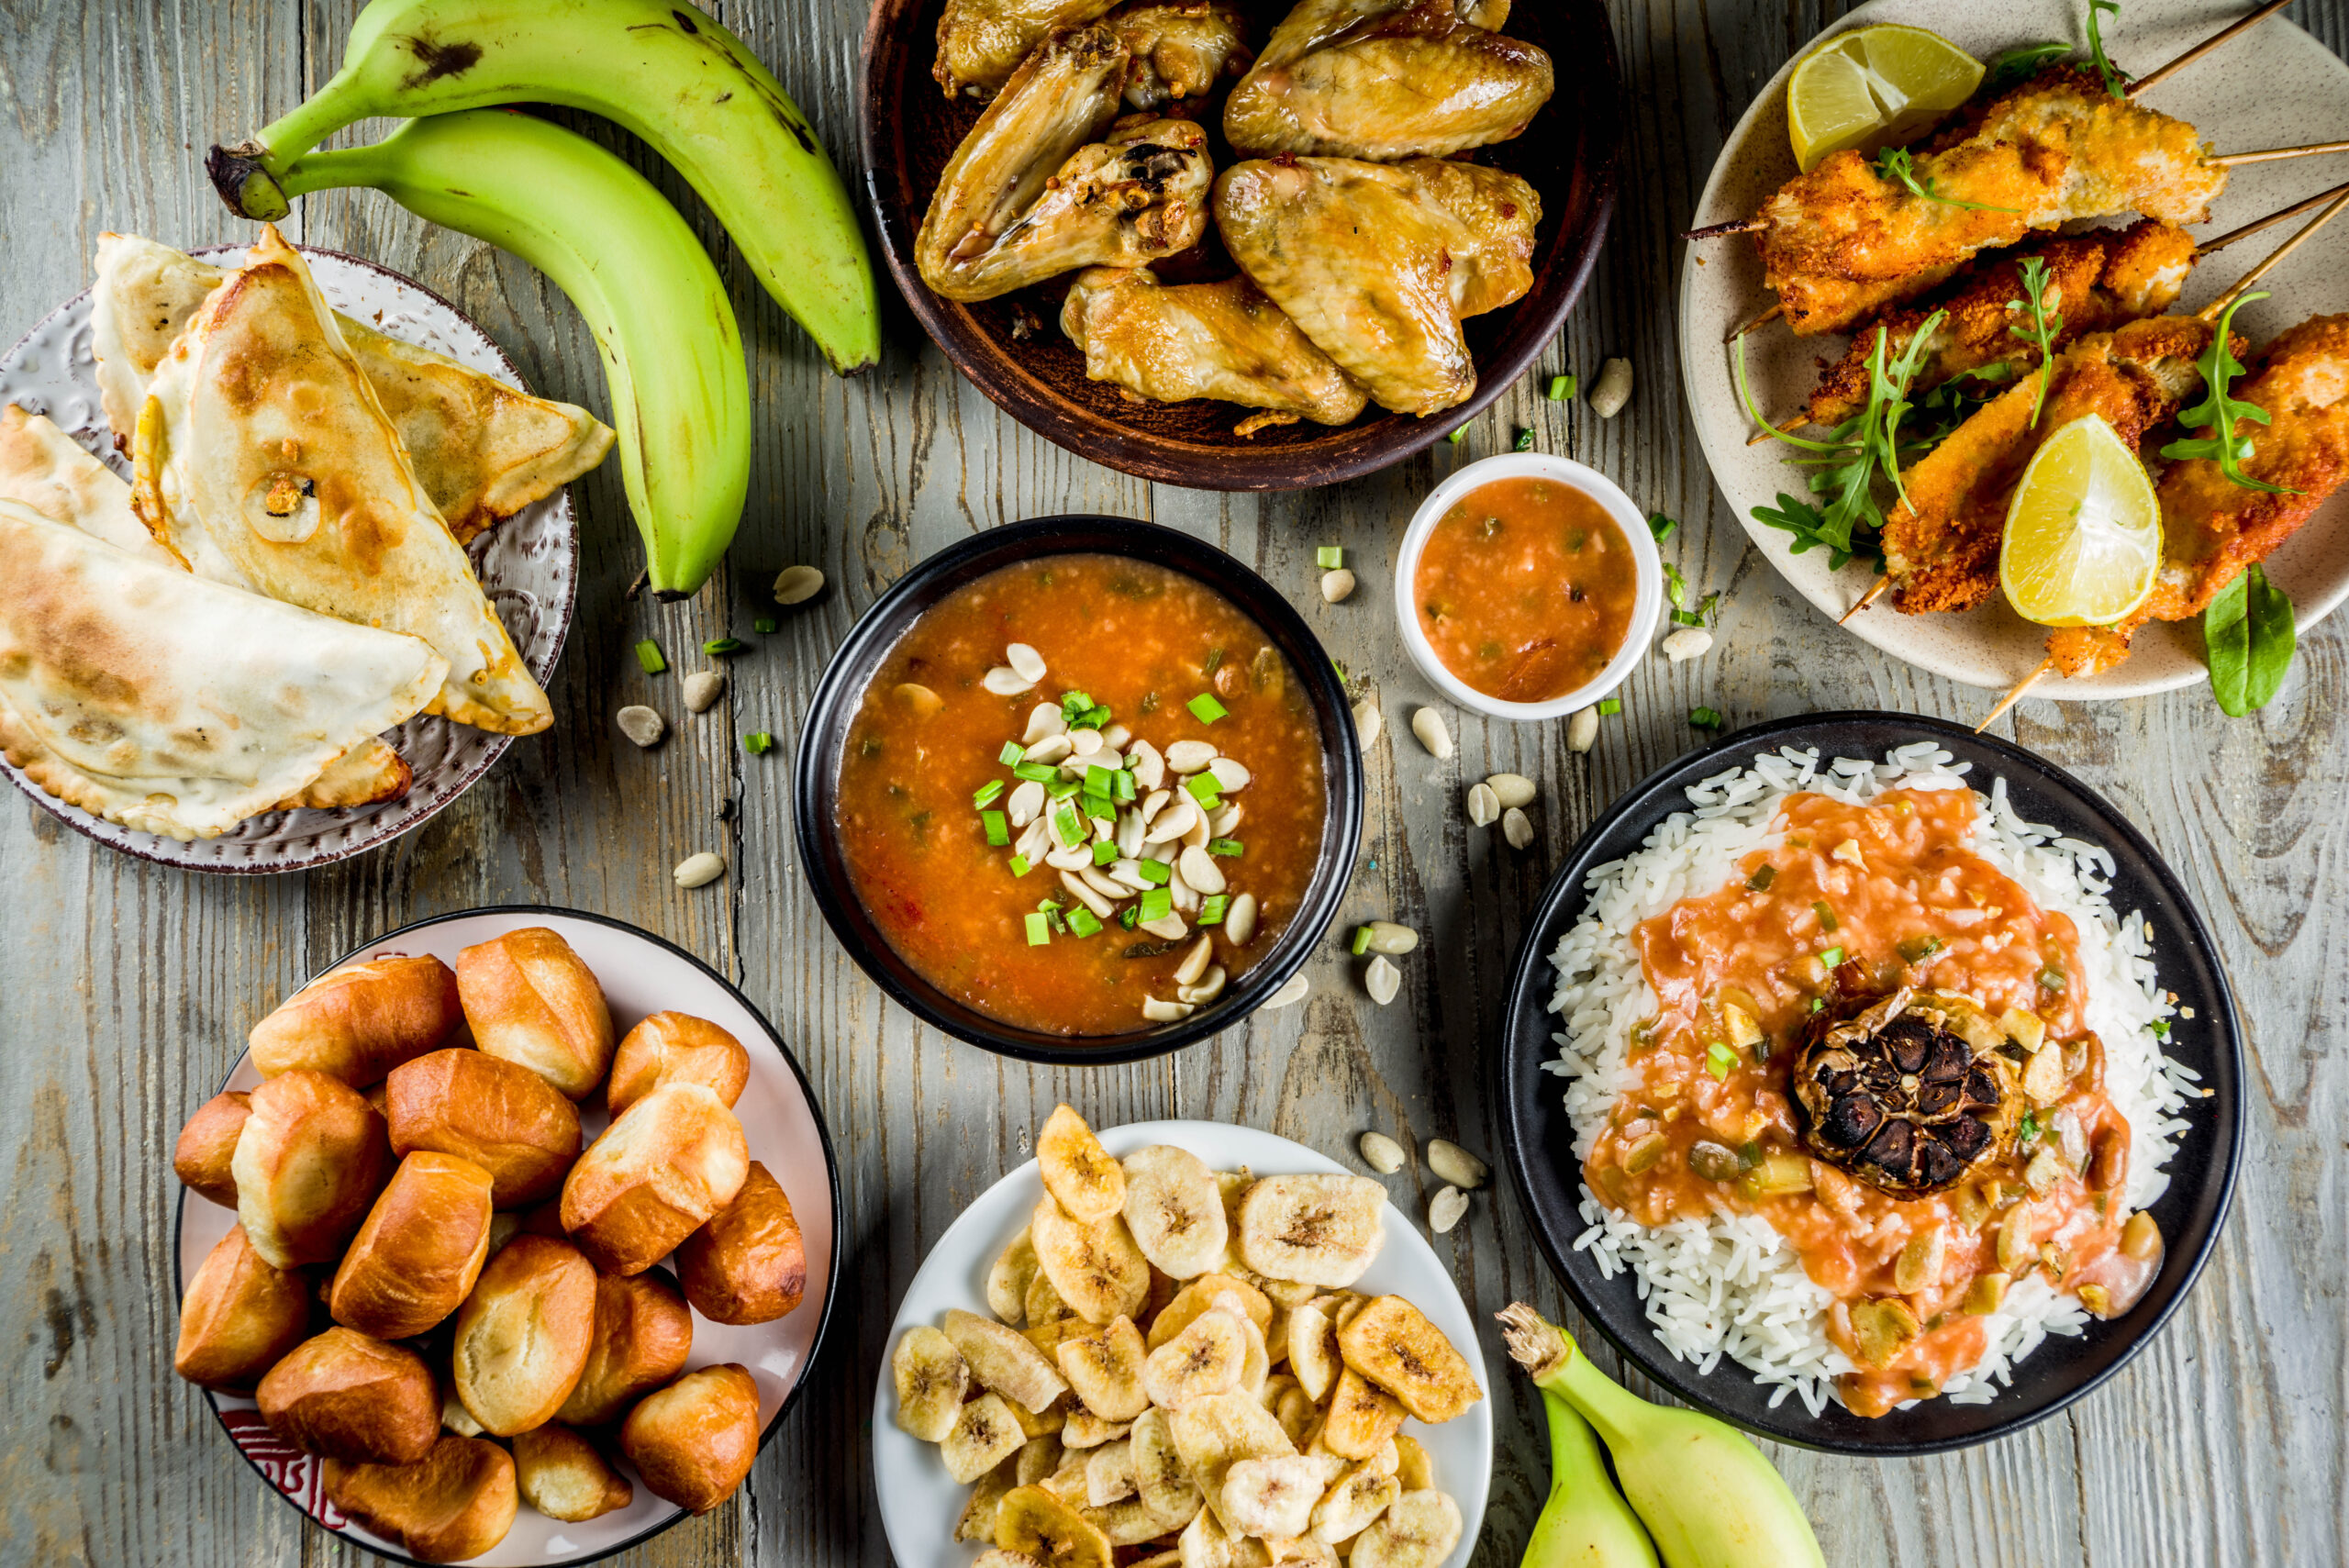 Traditional Wset African dishes assortment - peanut soup, jollof rice, grilled chicken wings, dry fried bananas plantains, nigerian chicken kebabs, meat pies, top view